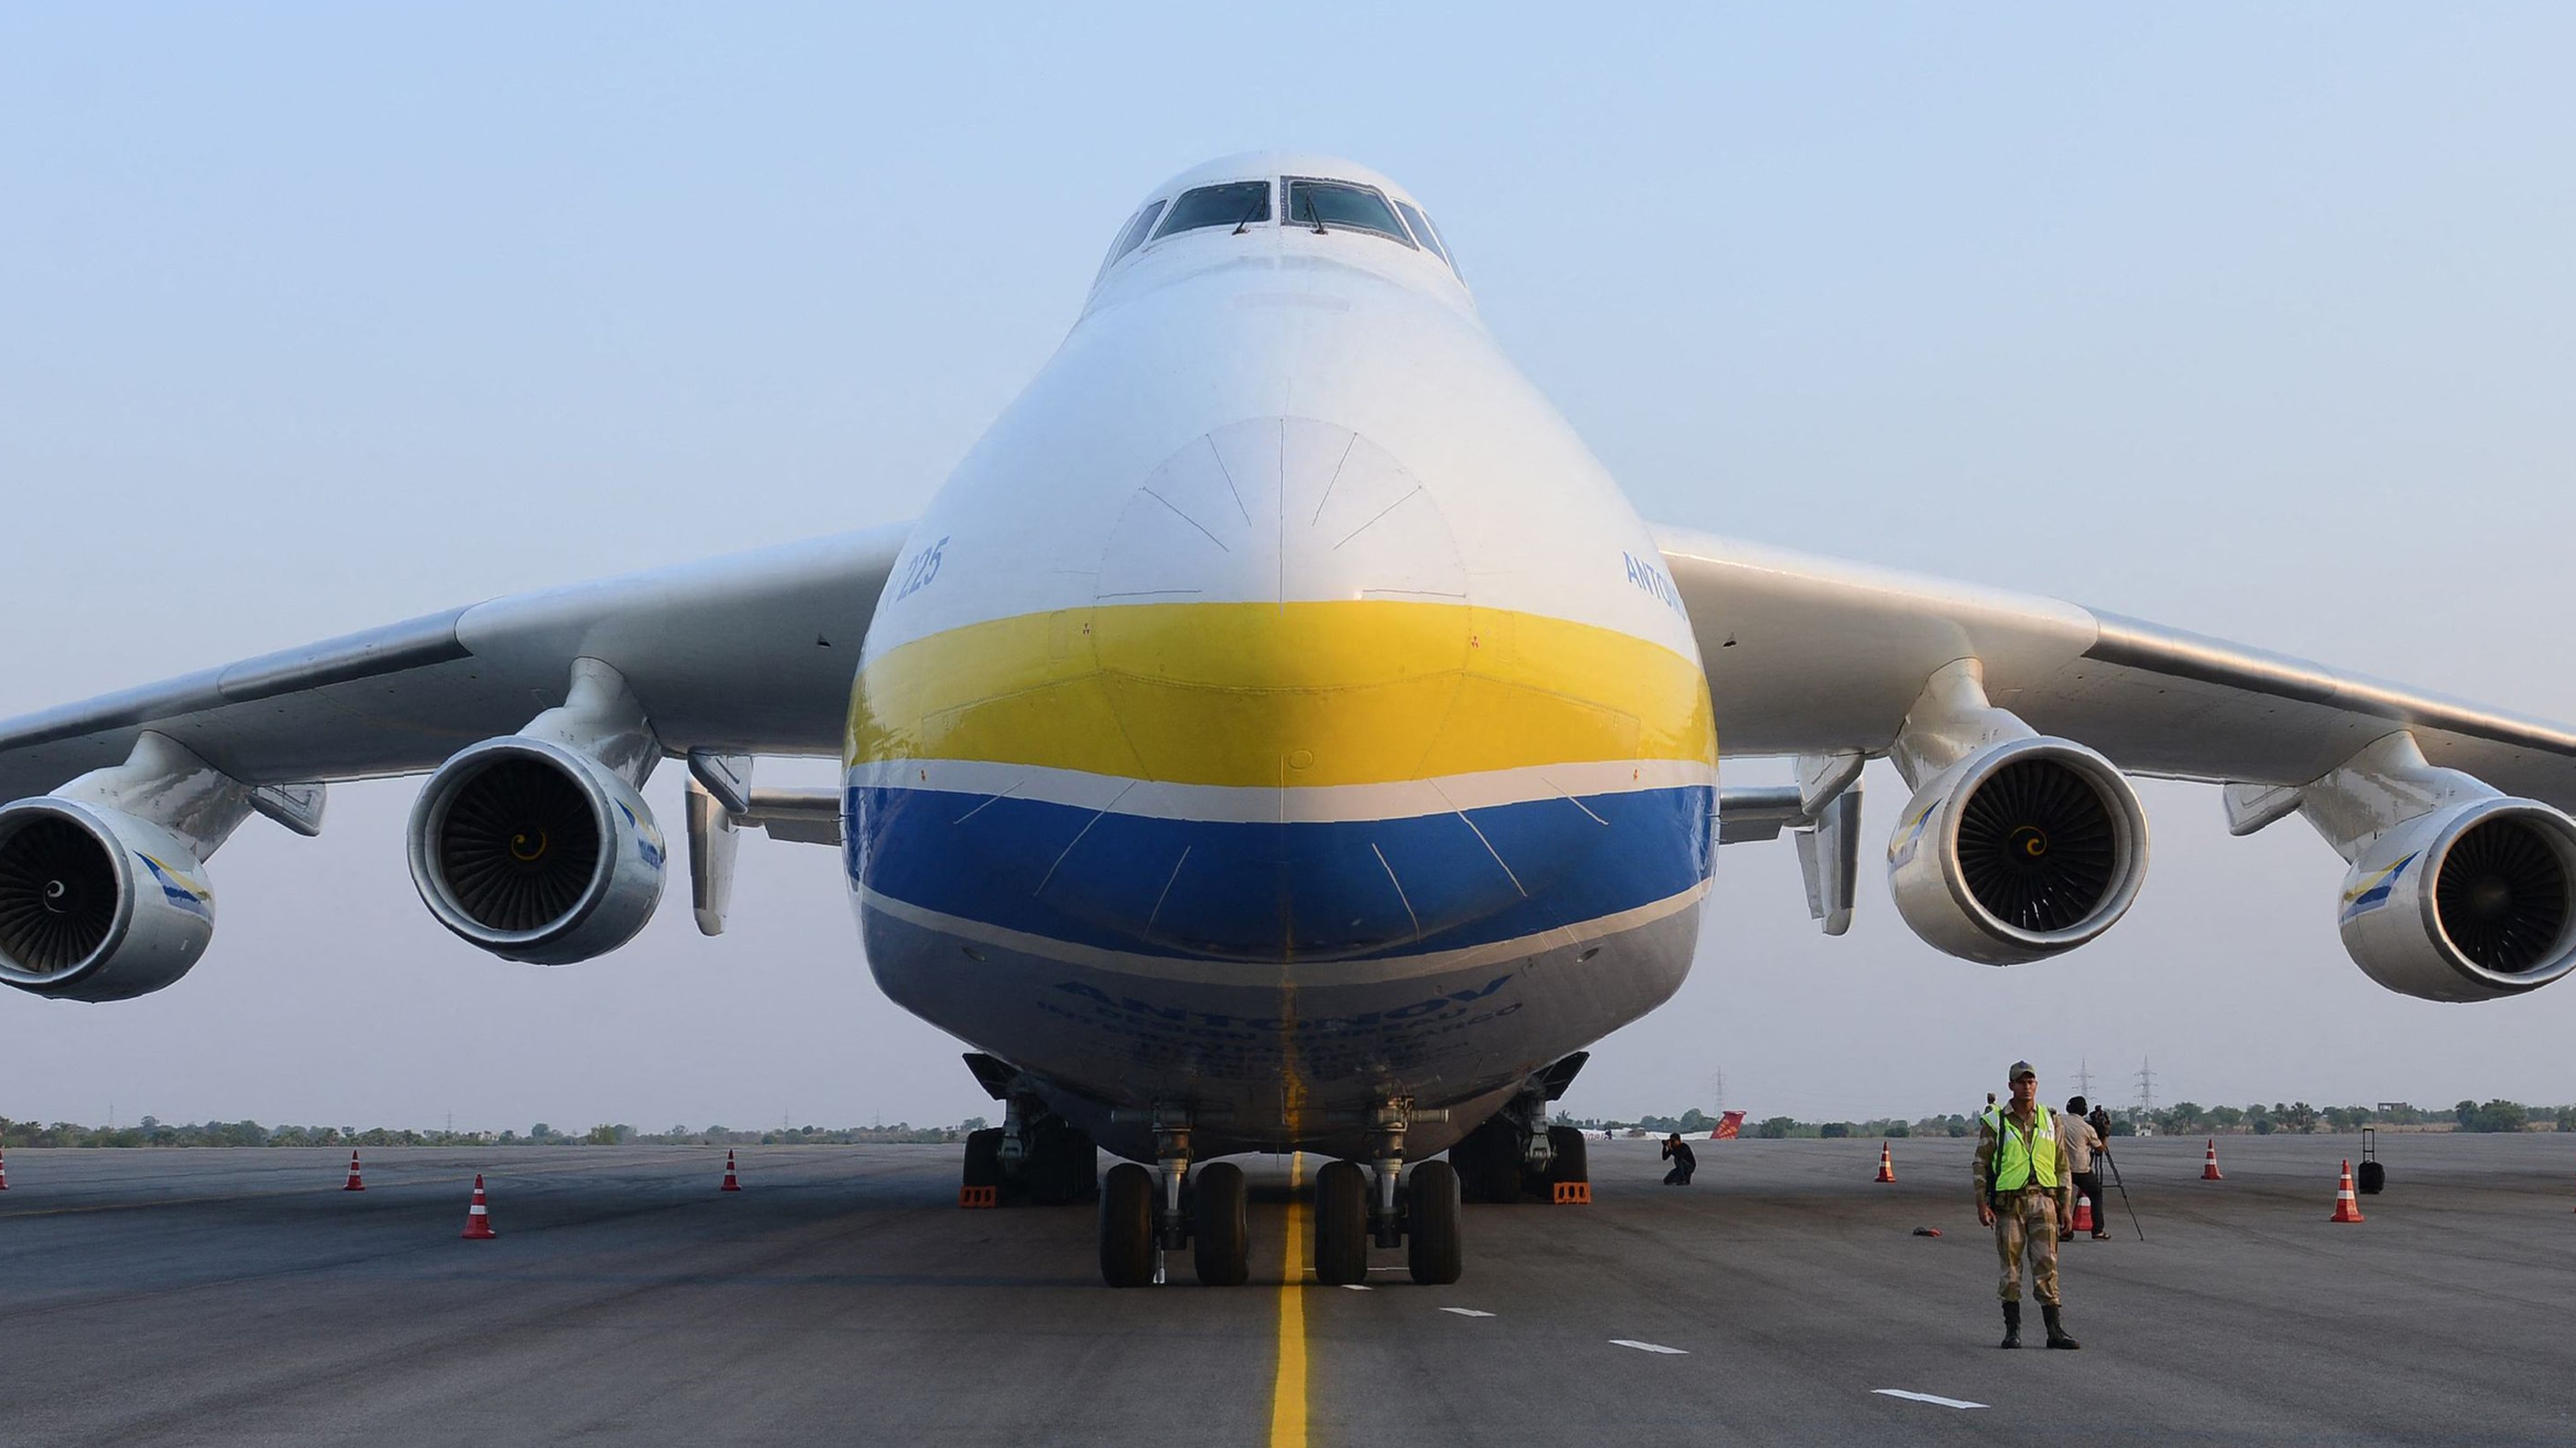 The world's biggest plane, destroyed in Ukraine, will fly again in Microsoft Flight Simulator